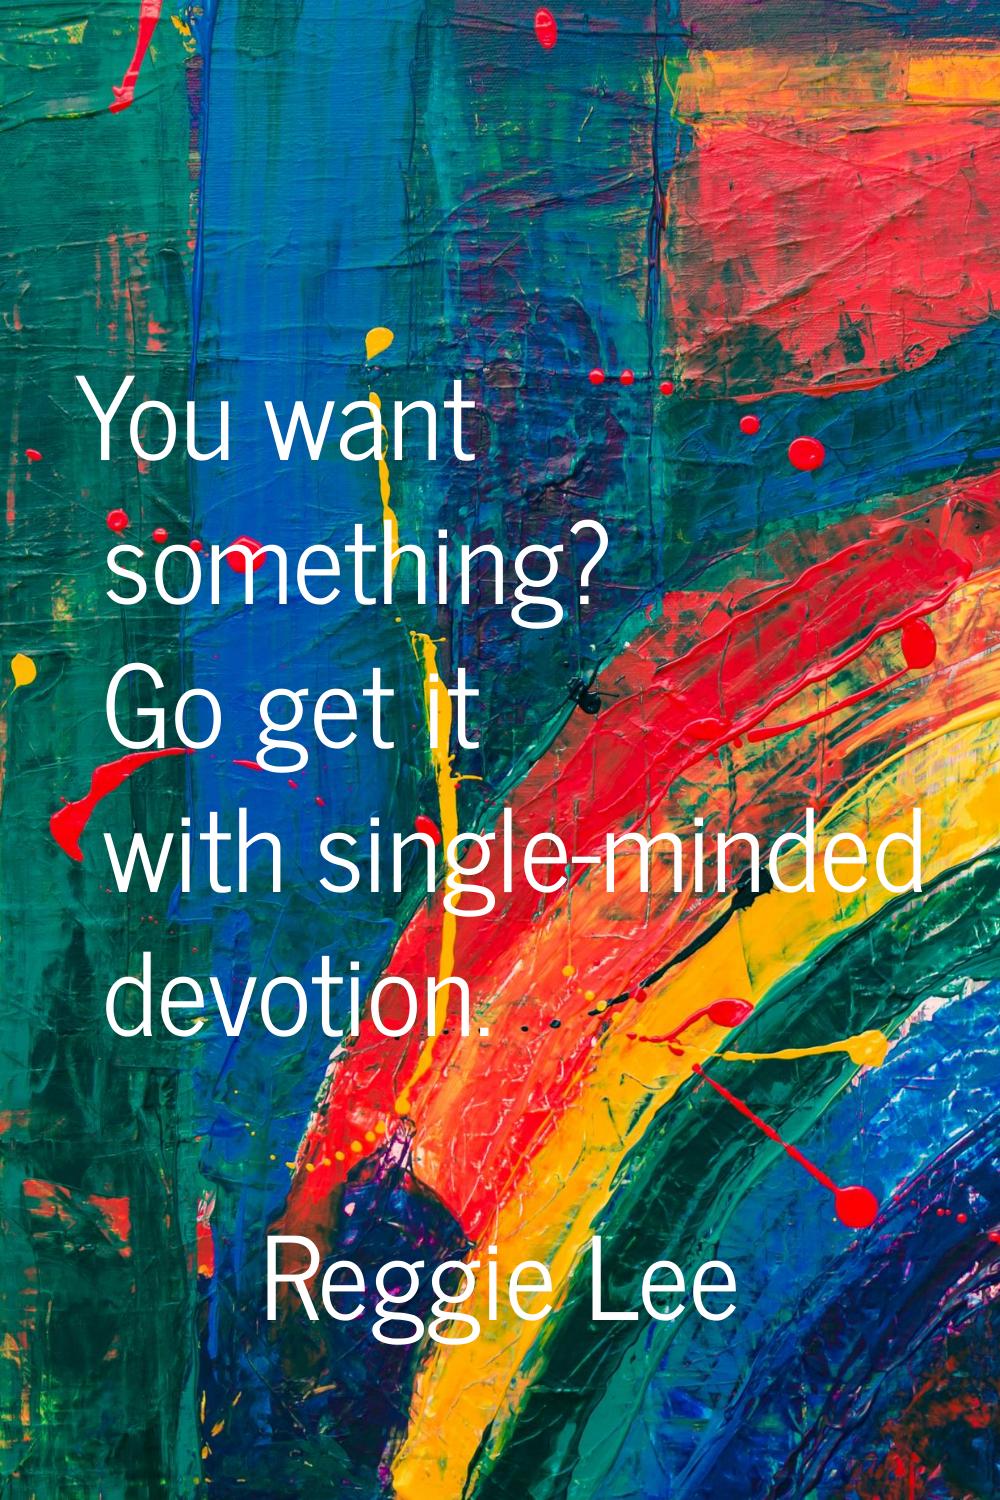 You want something? Go get it with single-minded devotion.